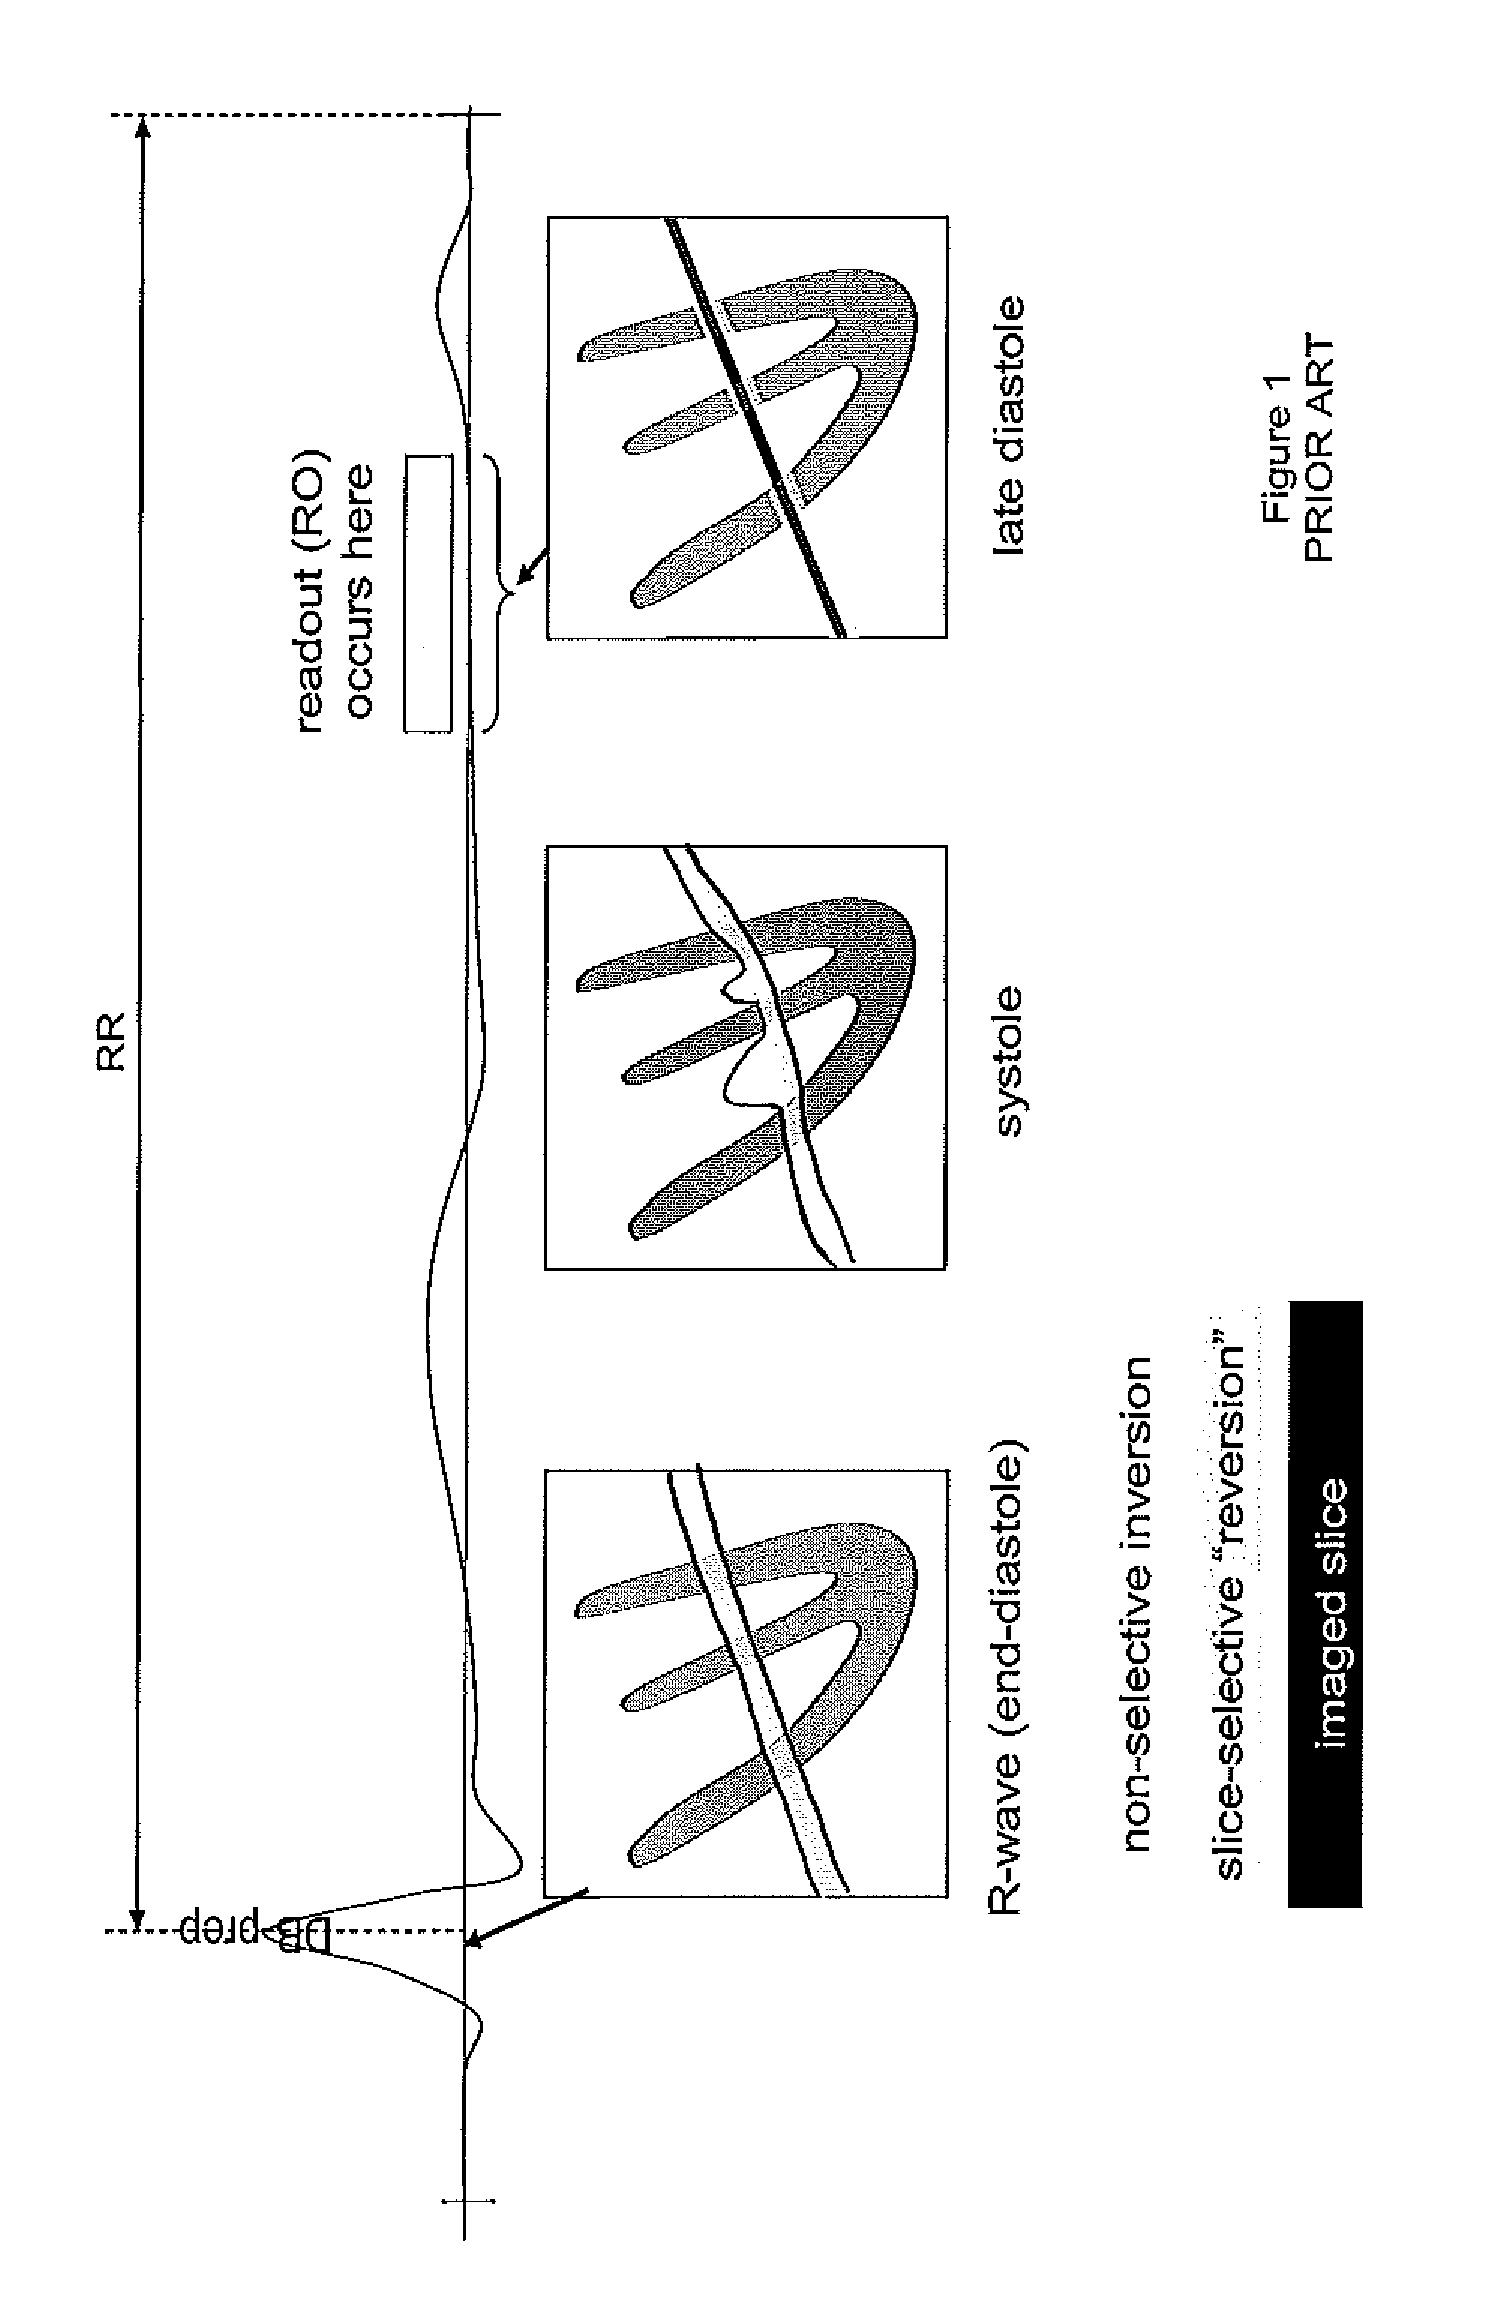 System for automated parameter setting in cardiac magnetic resonance imaging